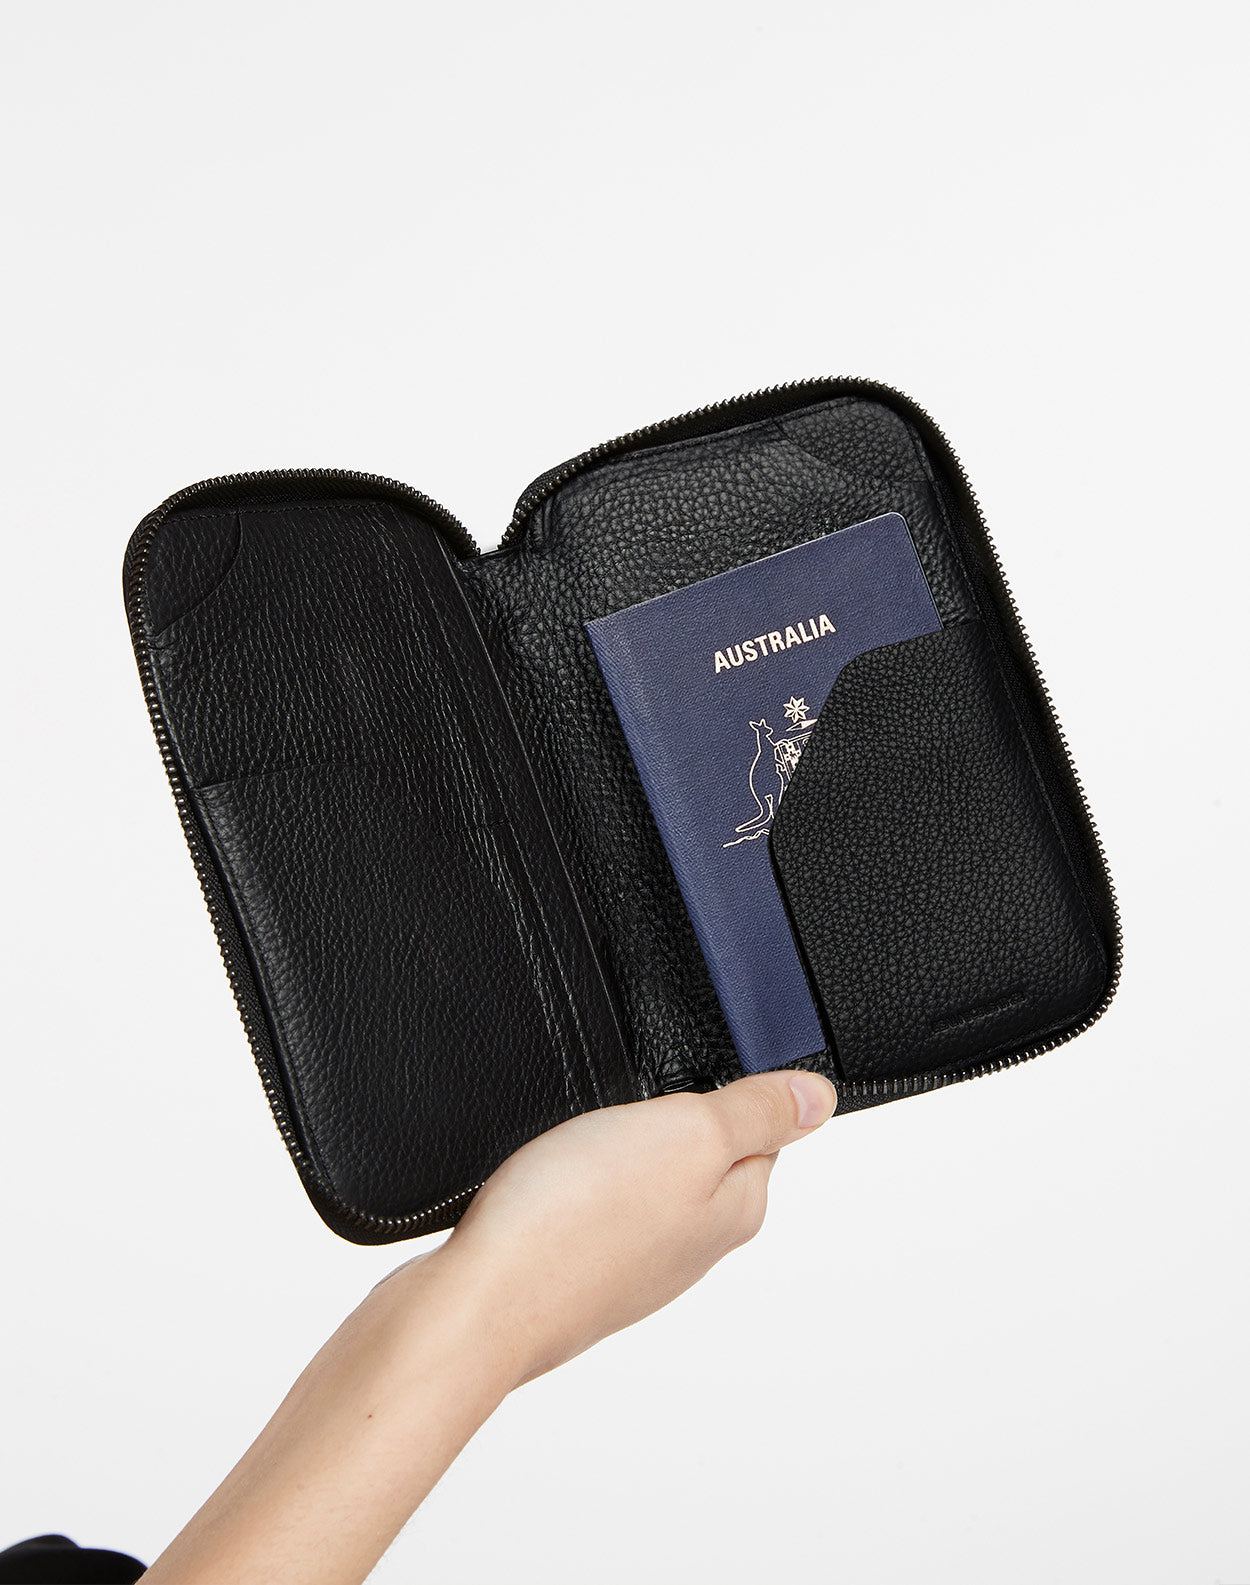 Status Anxiety Nowhere To Be Found Leather Passport Wallet